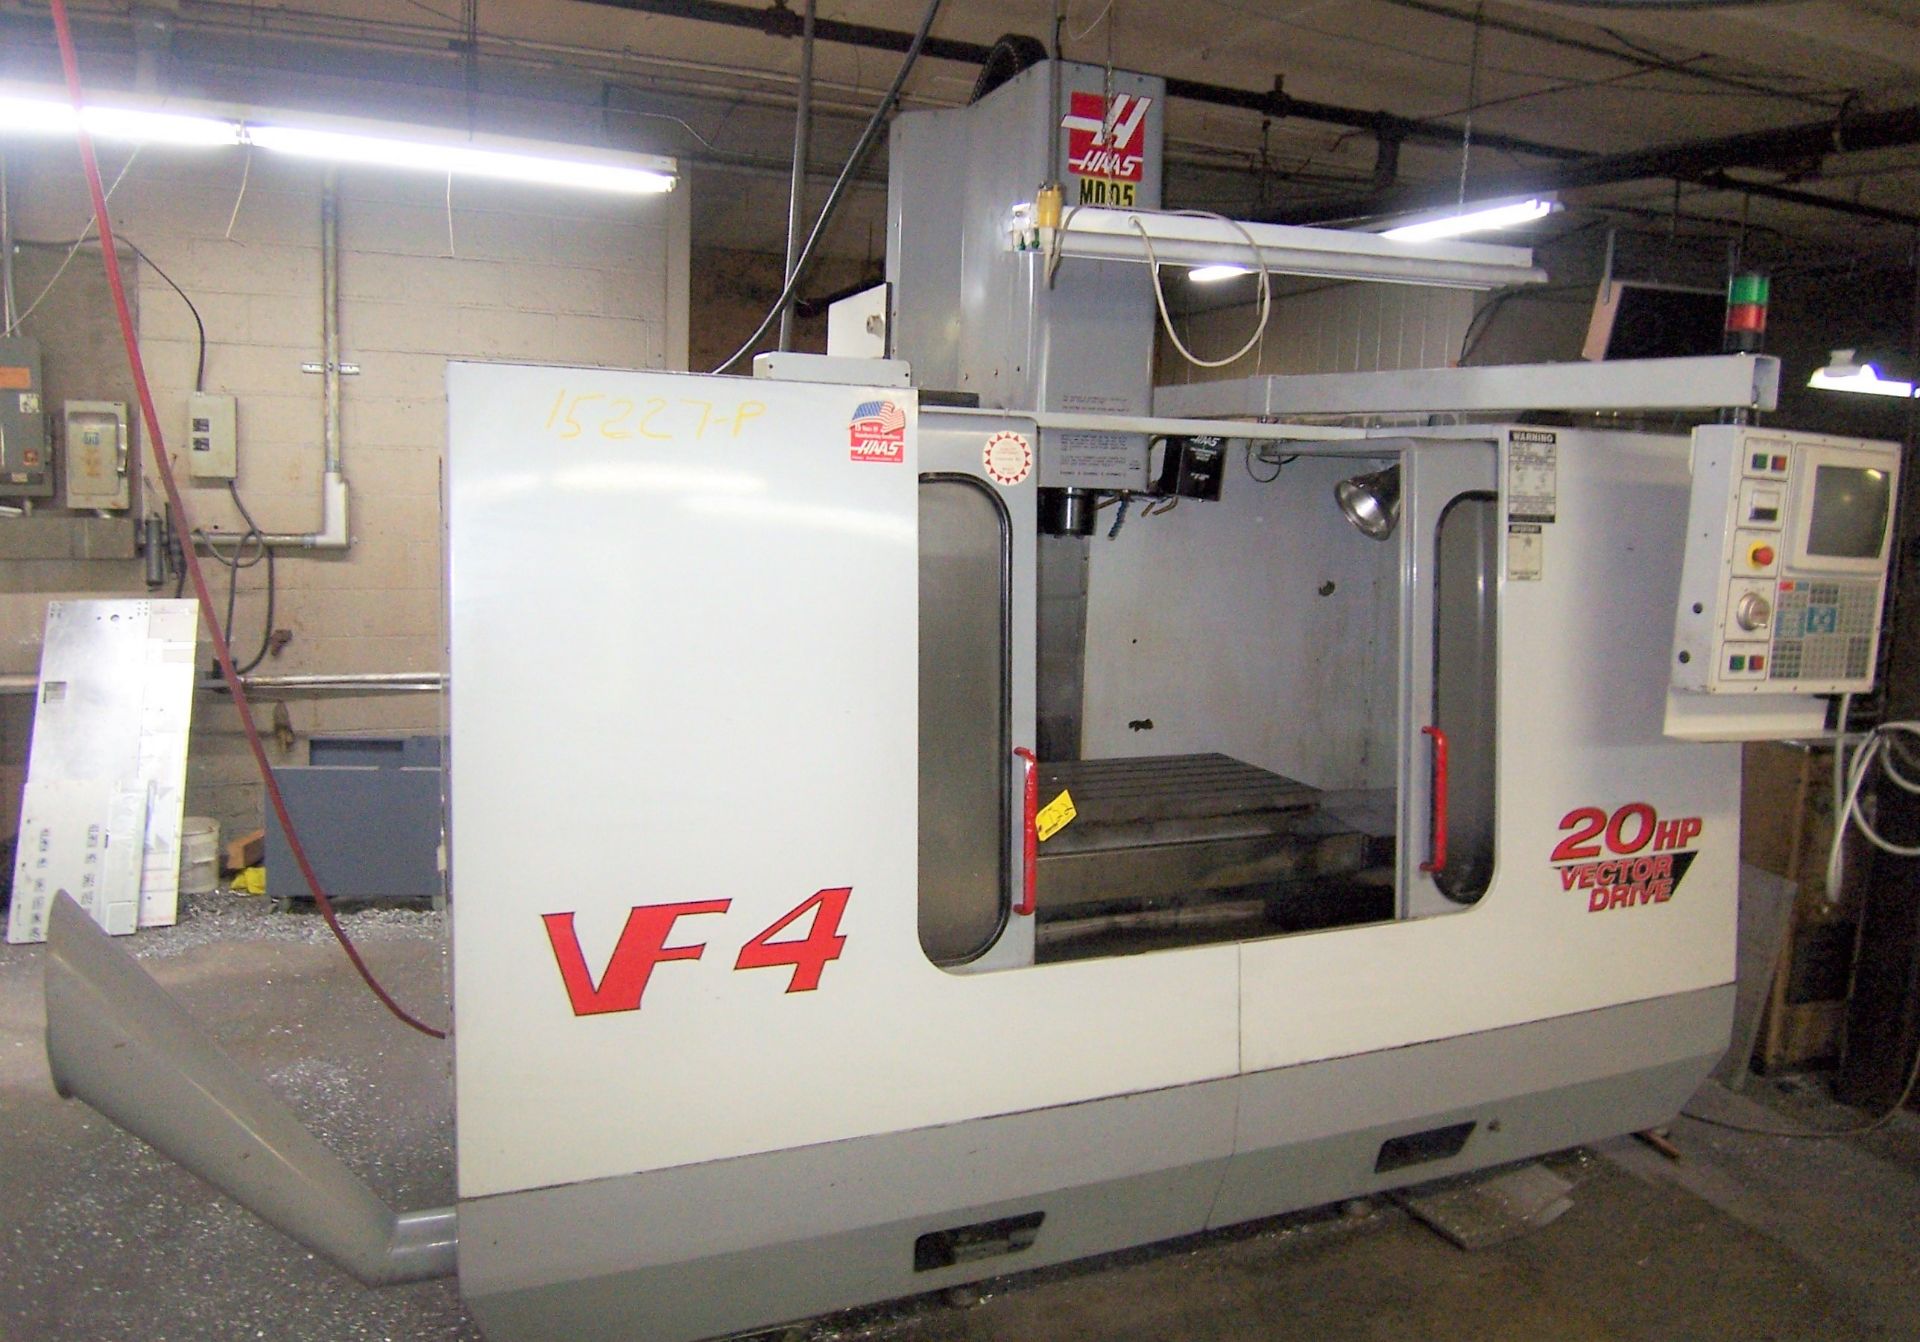 HAAS MDL. VF4 CNC VERTICAL MACHINING CENTER WITH 20-POSITION AUTOMATIC TOOL CHANGER, 20 HP VECTOR - Image 2 of 5